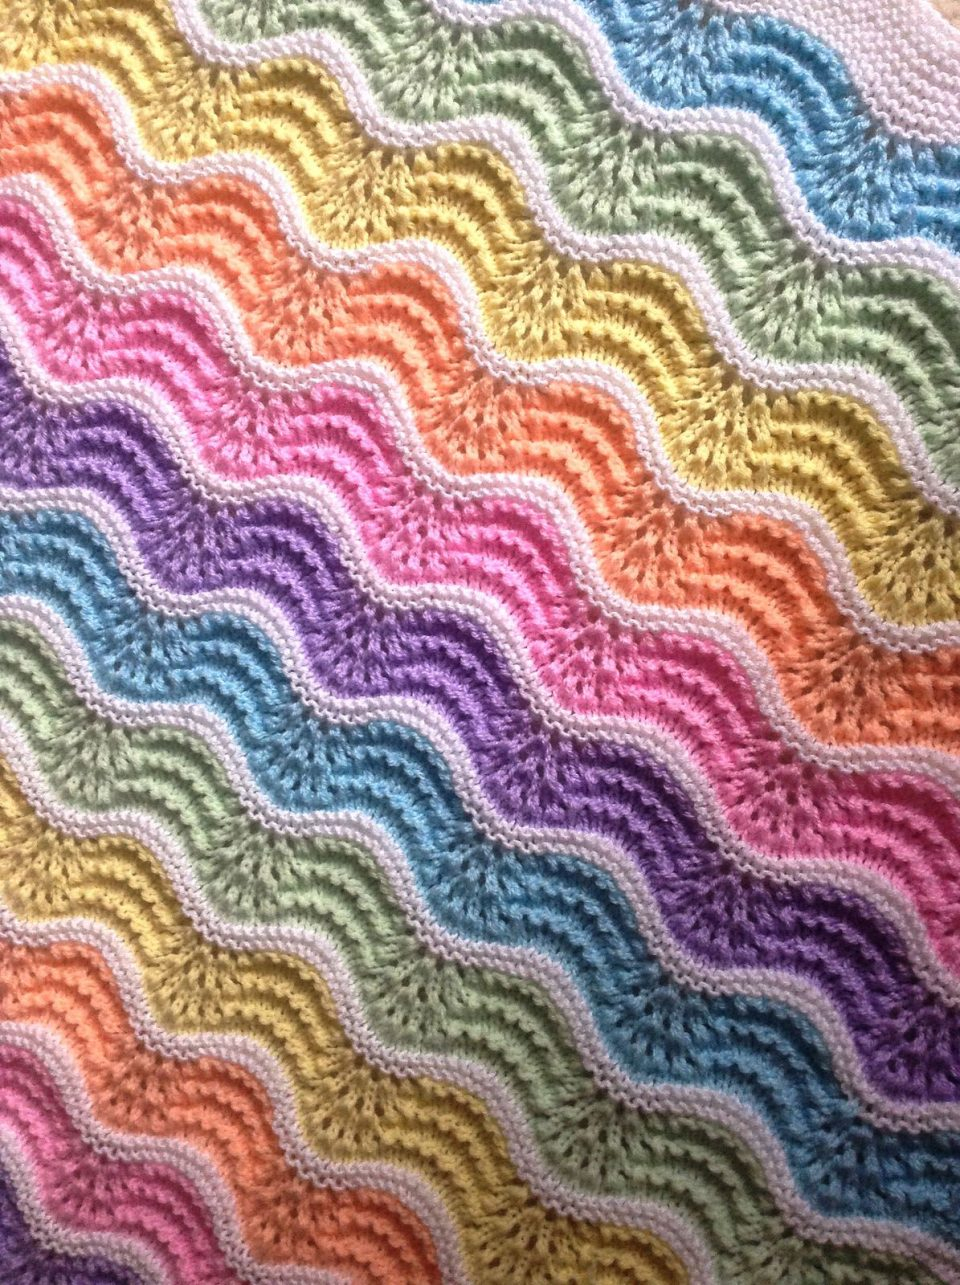 Knitting Patterns For Baby Blankets Easy Free Knitting Pattern For Pastel Rainbow Ba Blanket Easy Knitted